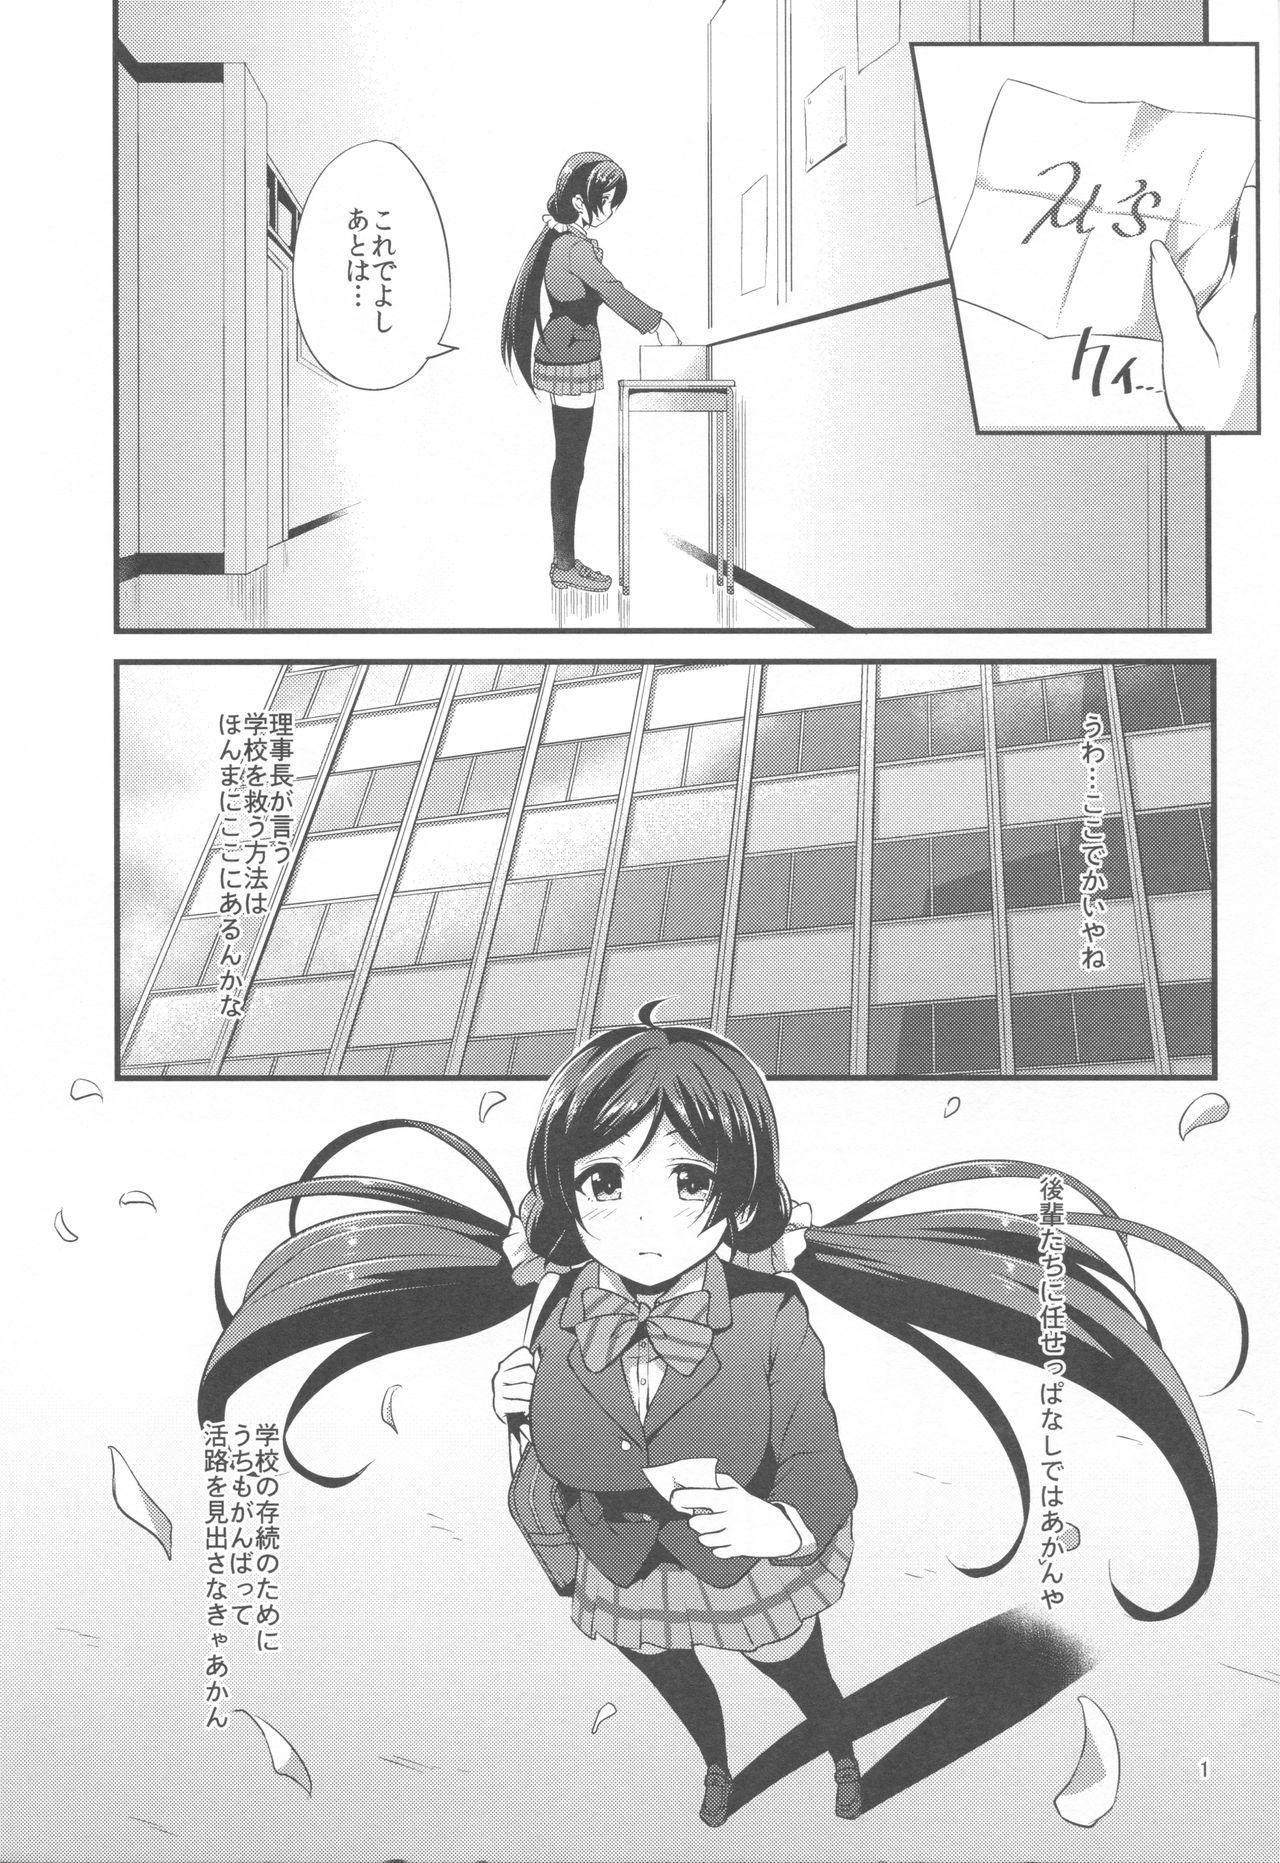 (C90) [chested (Tokupyon)] BAD END HEAVEN 4 (Love Live!) (C90) [chested (とくぴょん)] BAD END HEAVEN 4 (ラブライブ!)